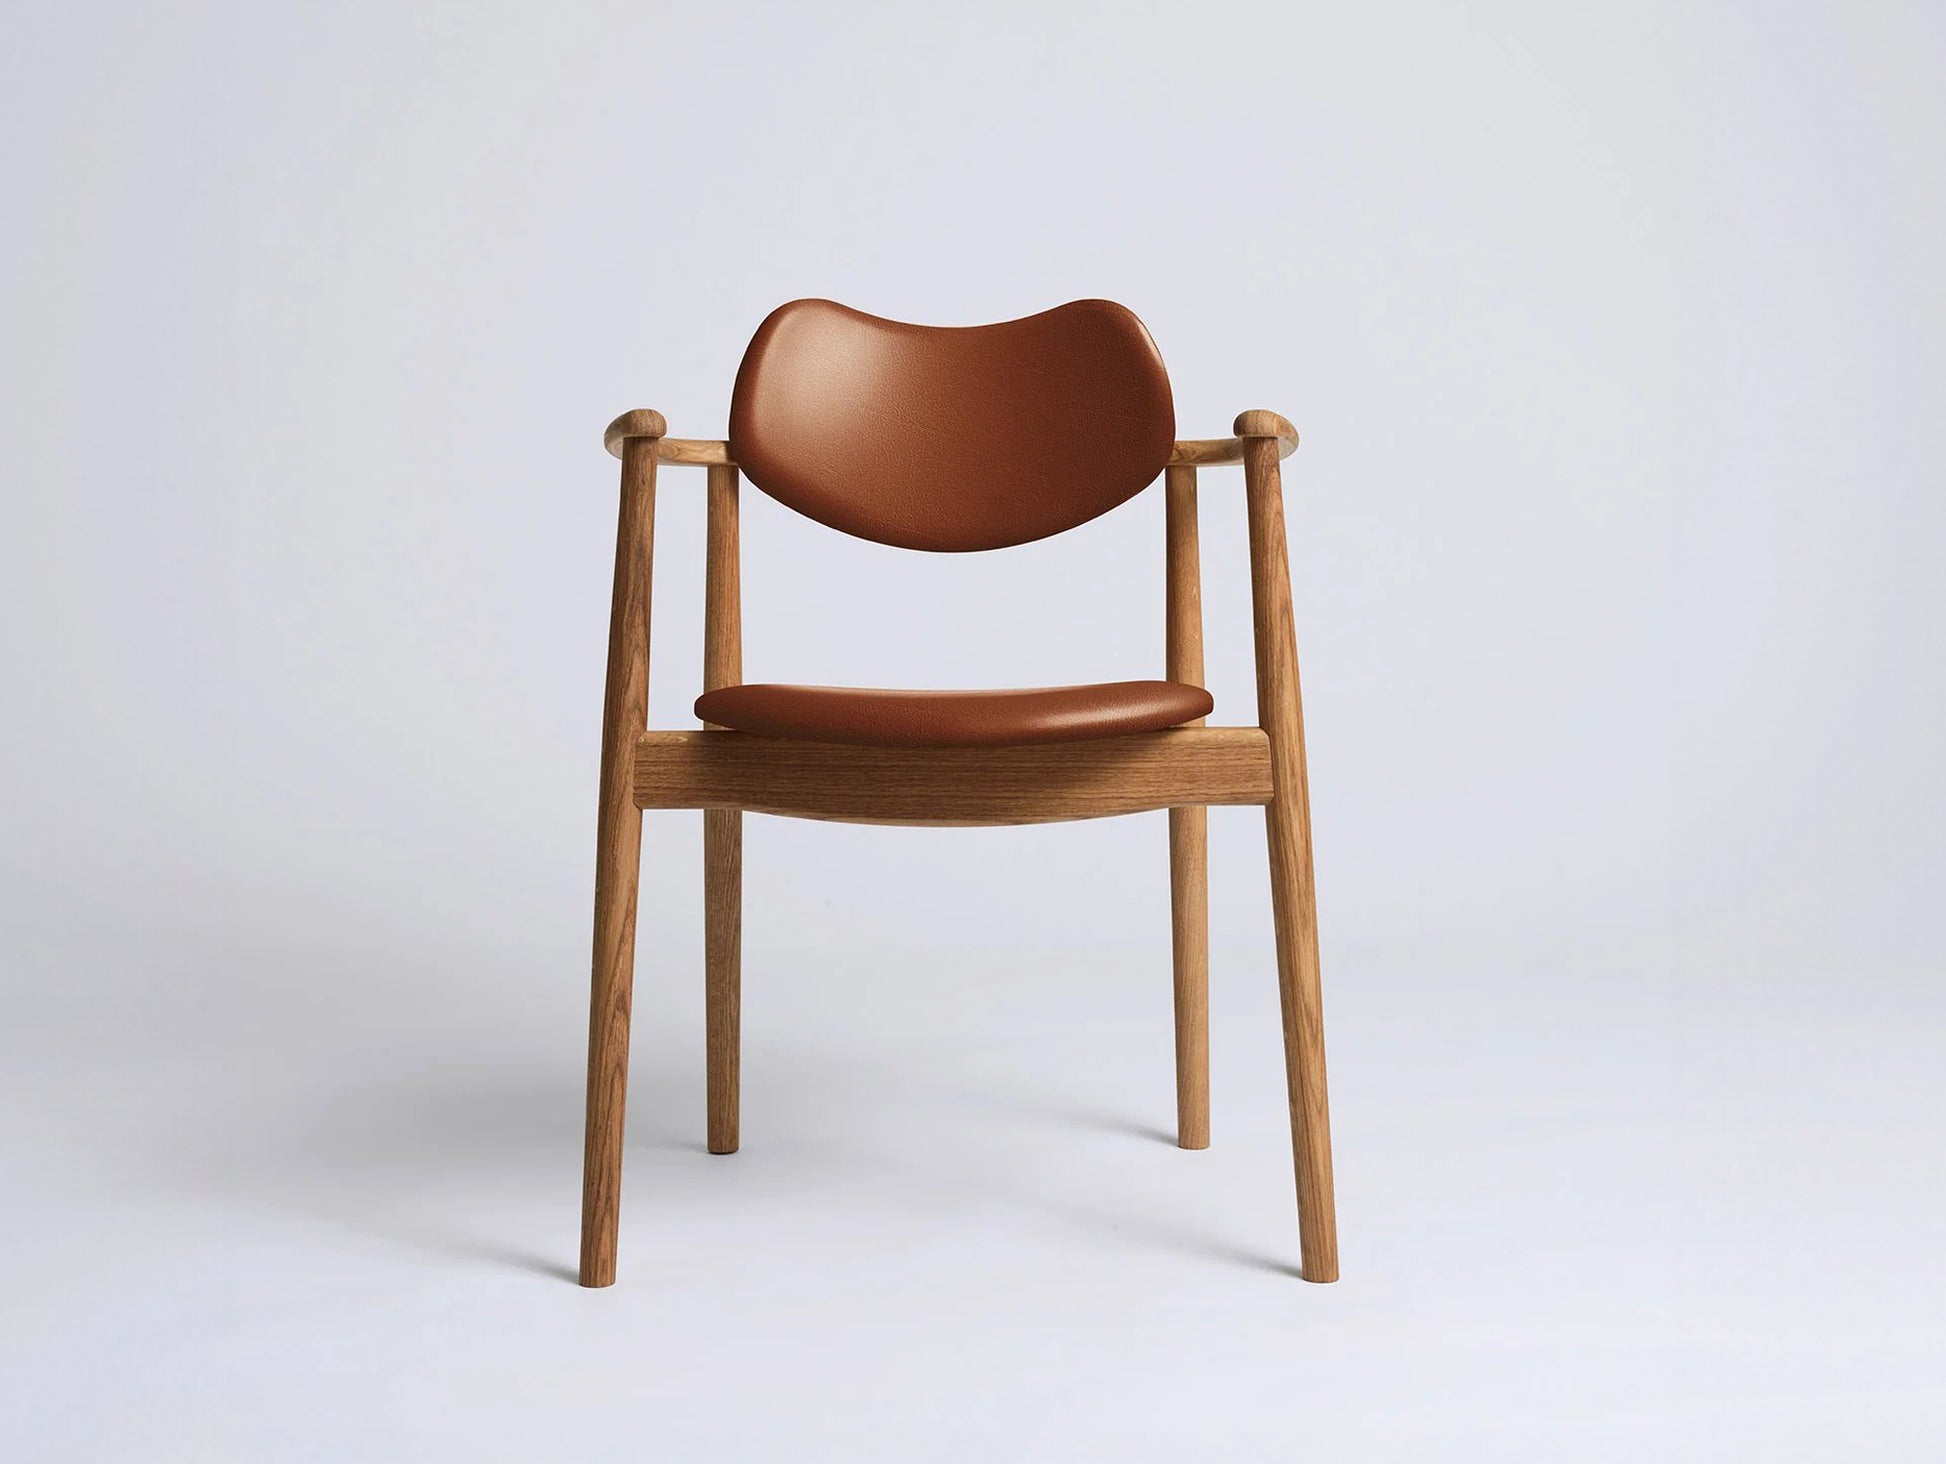 Regatta Chair Seat and Back Upholstered by Ro Collection - Oiled Oak / Exclusive Cognac Leather